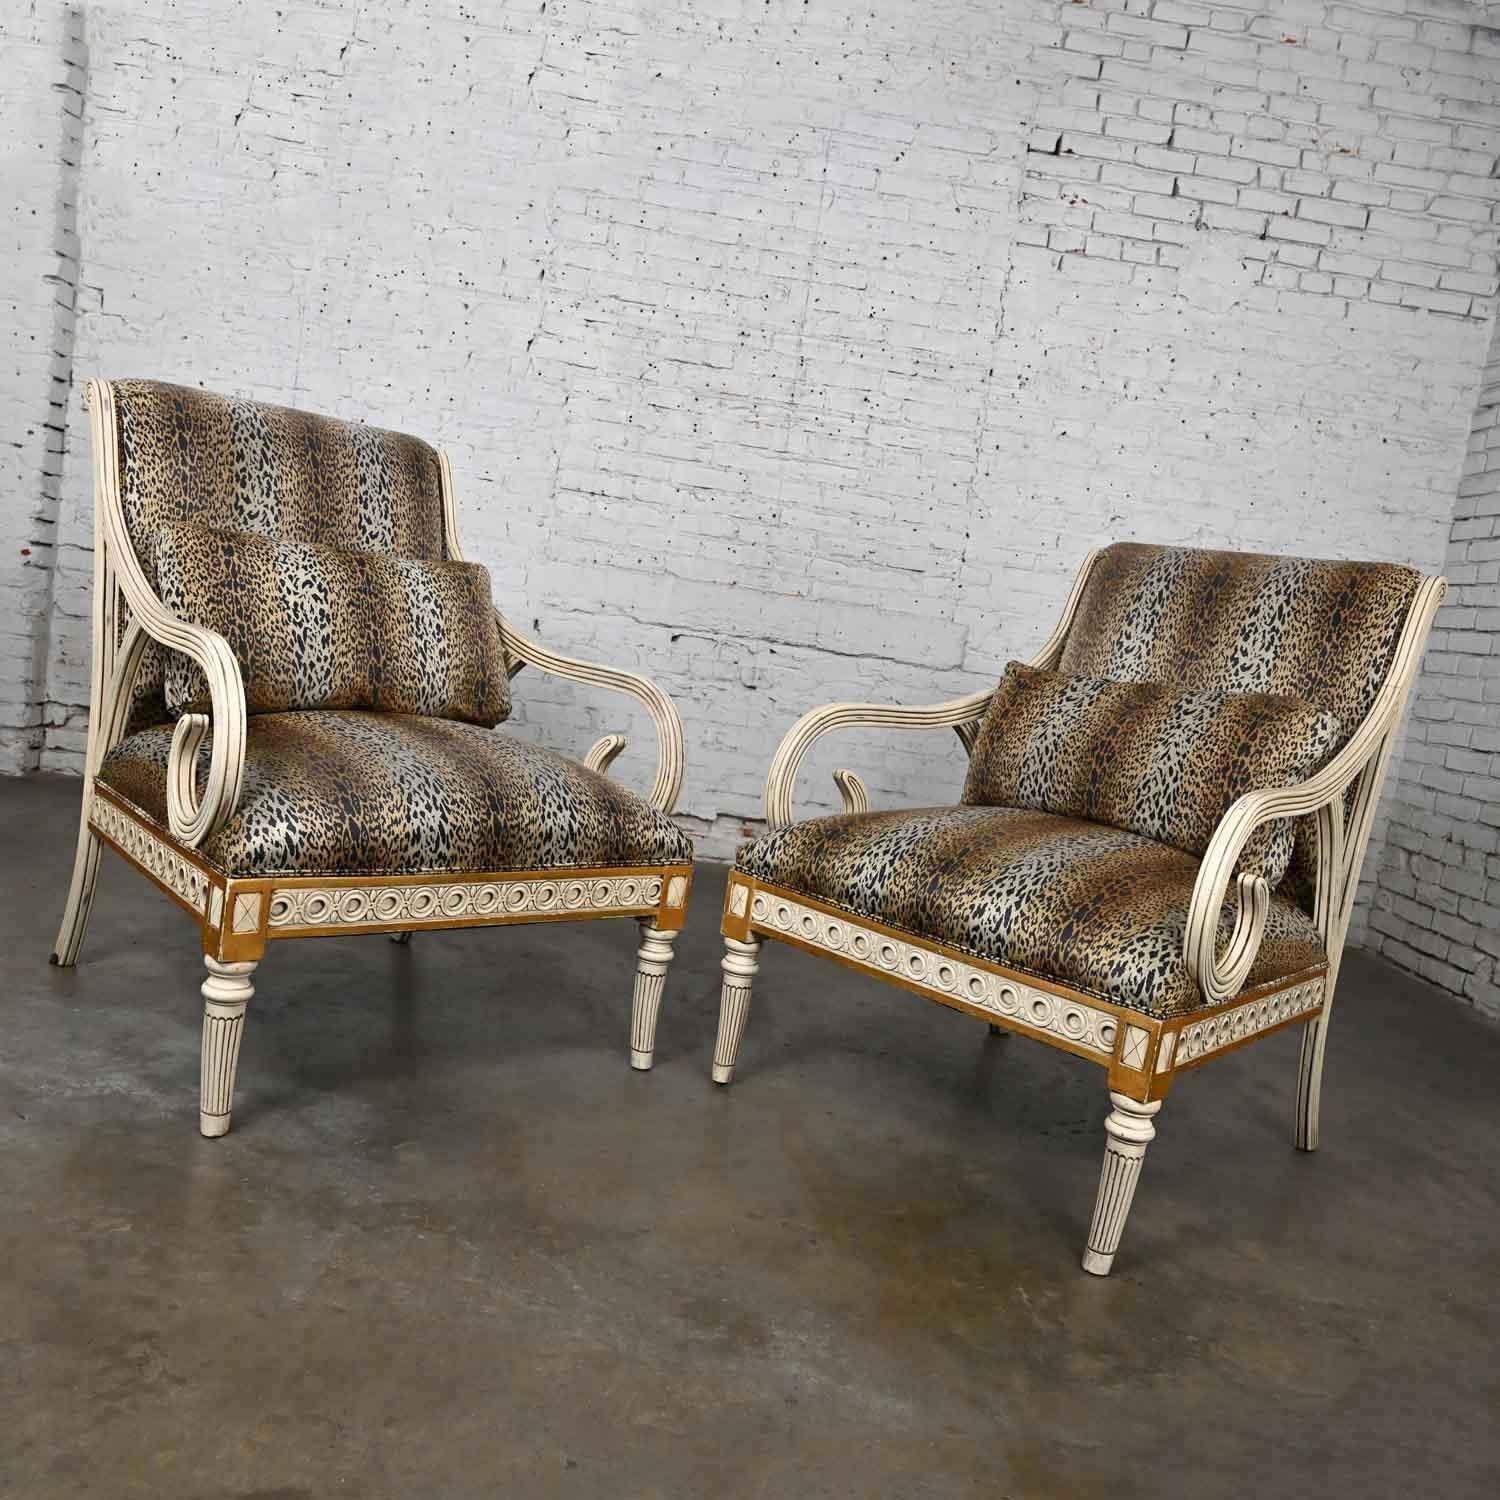 20th Century Late 20th Henredon Neoclassic Revival Animal Print Large Scale Arm Chairs a Pair For Sale